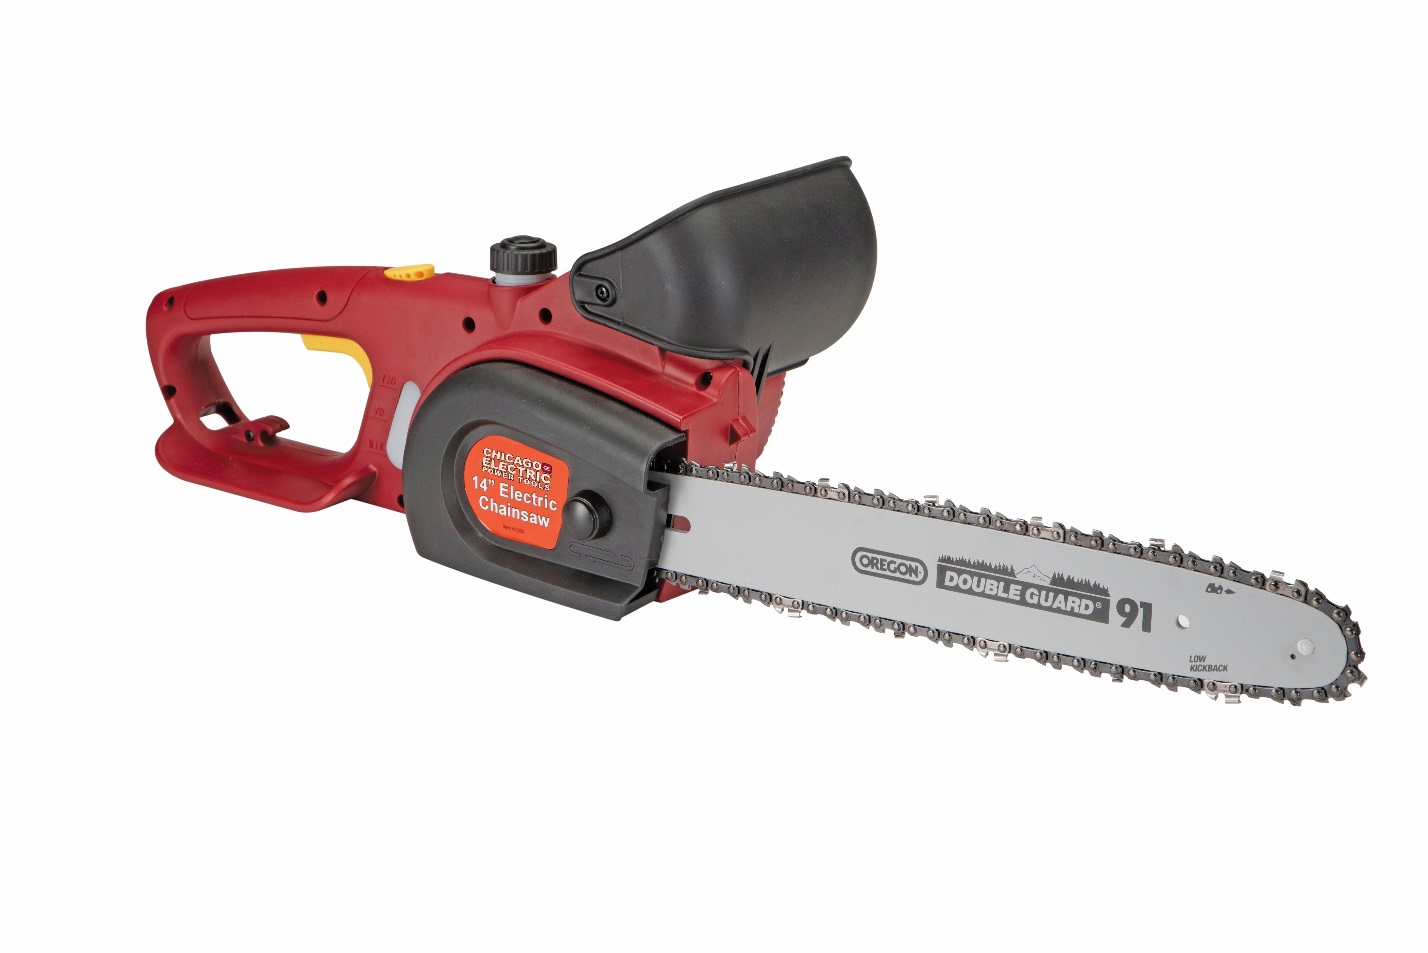 WORX corded electric chainsaw falls to $50, more